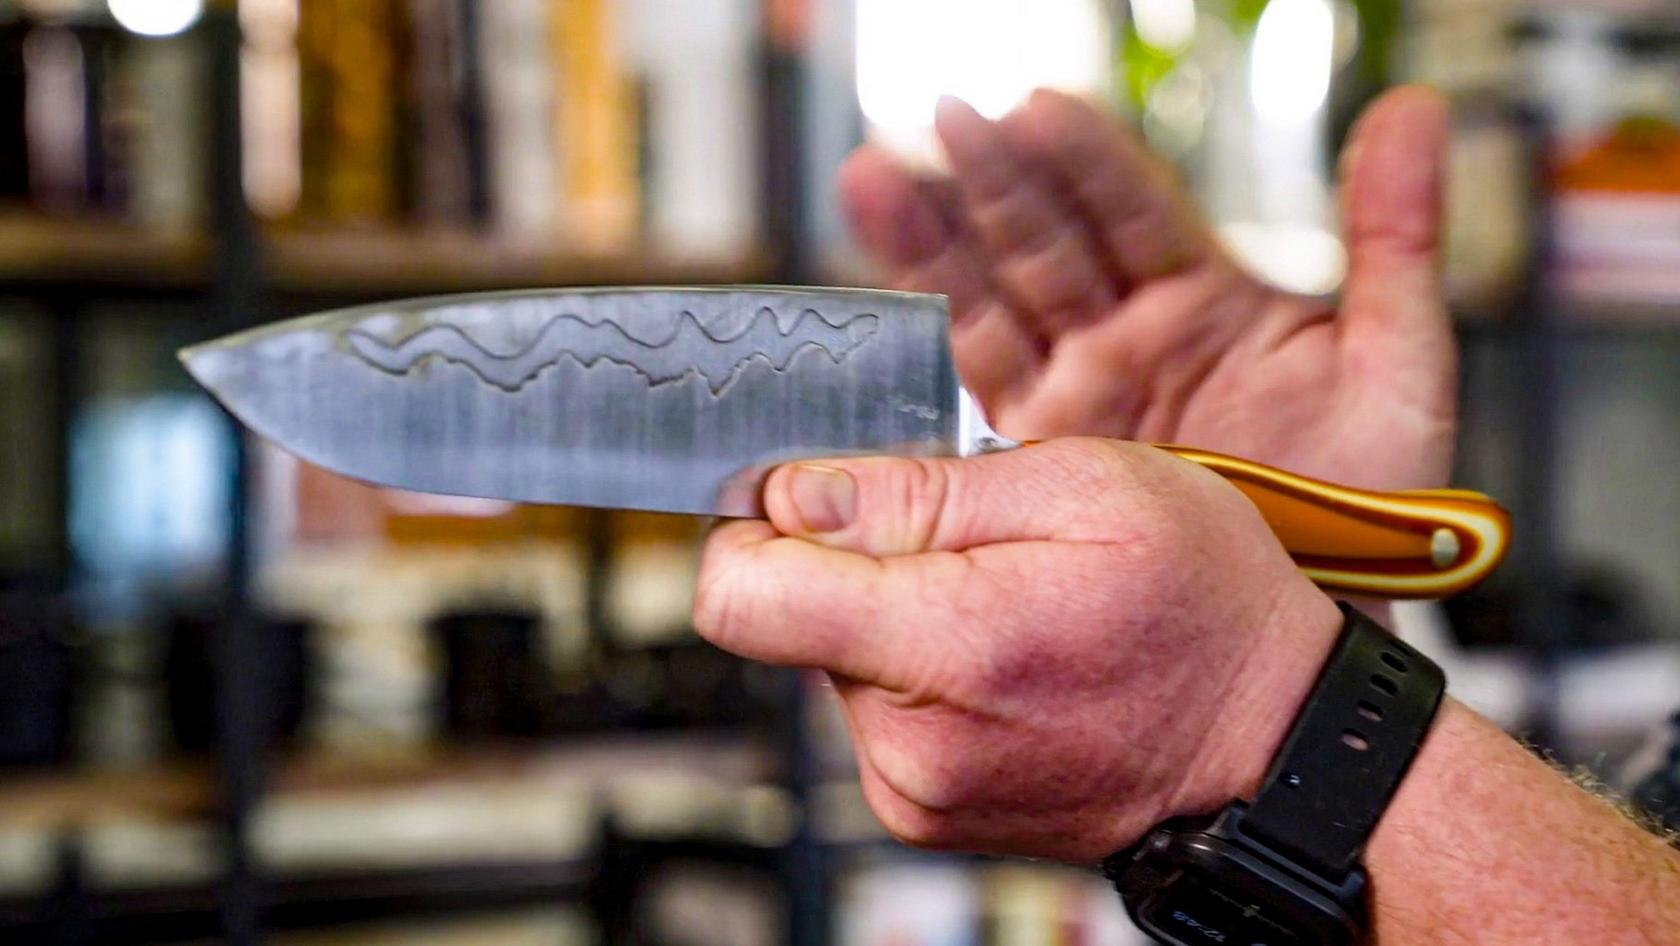 Knife Skills: Sharpening with Ty Hess